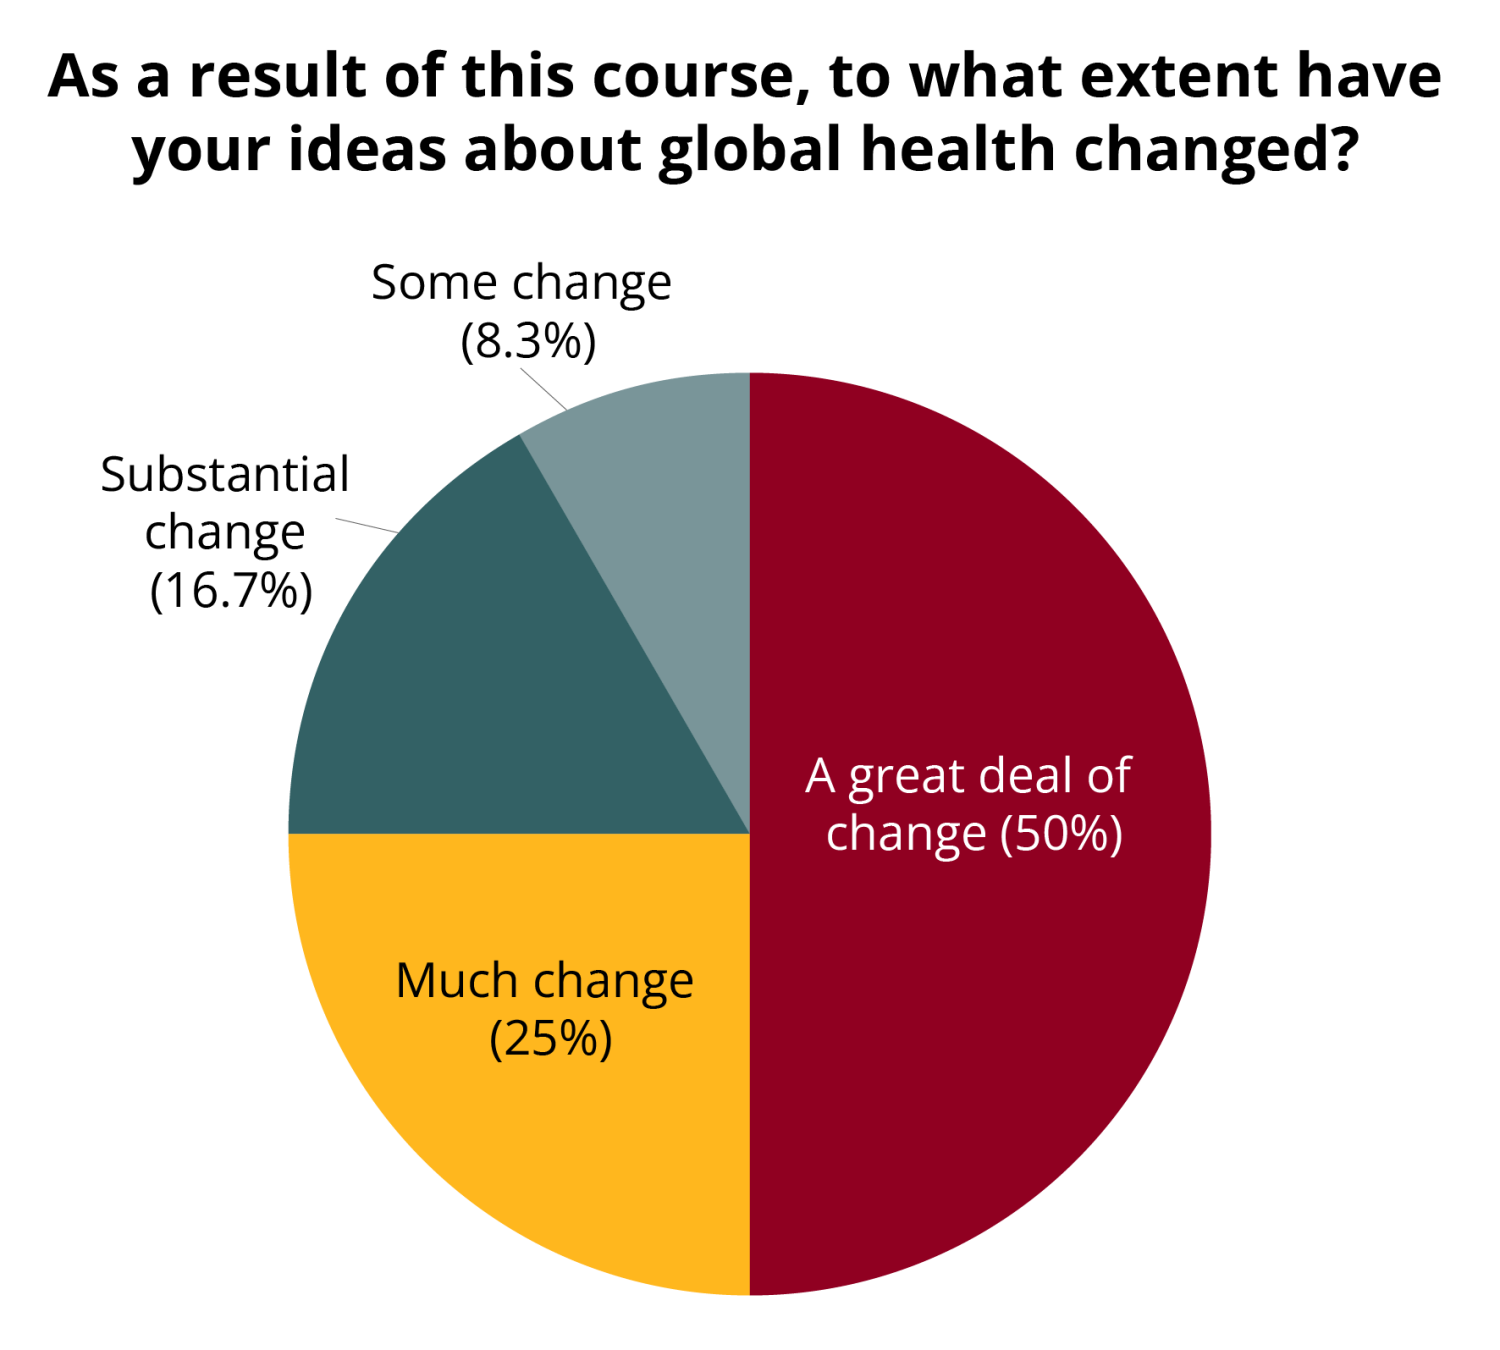 Pie chart depicting data showcasing how much students' ideas about global health changed after taking Global Local course.